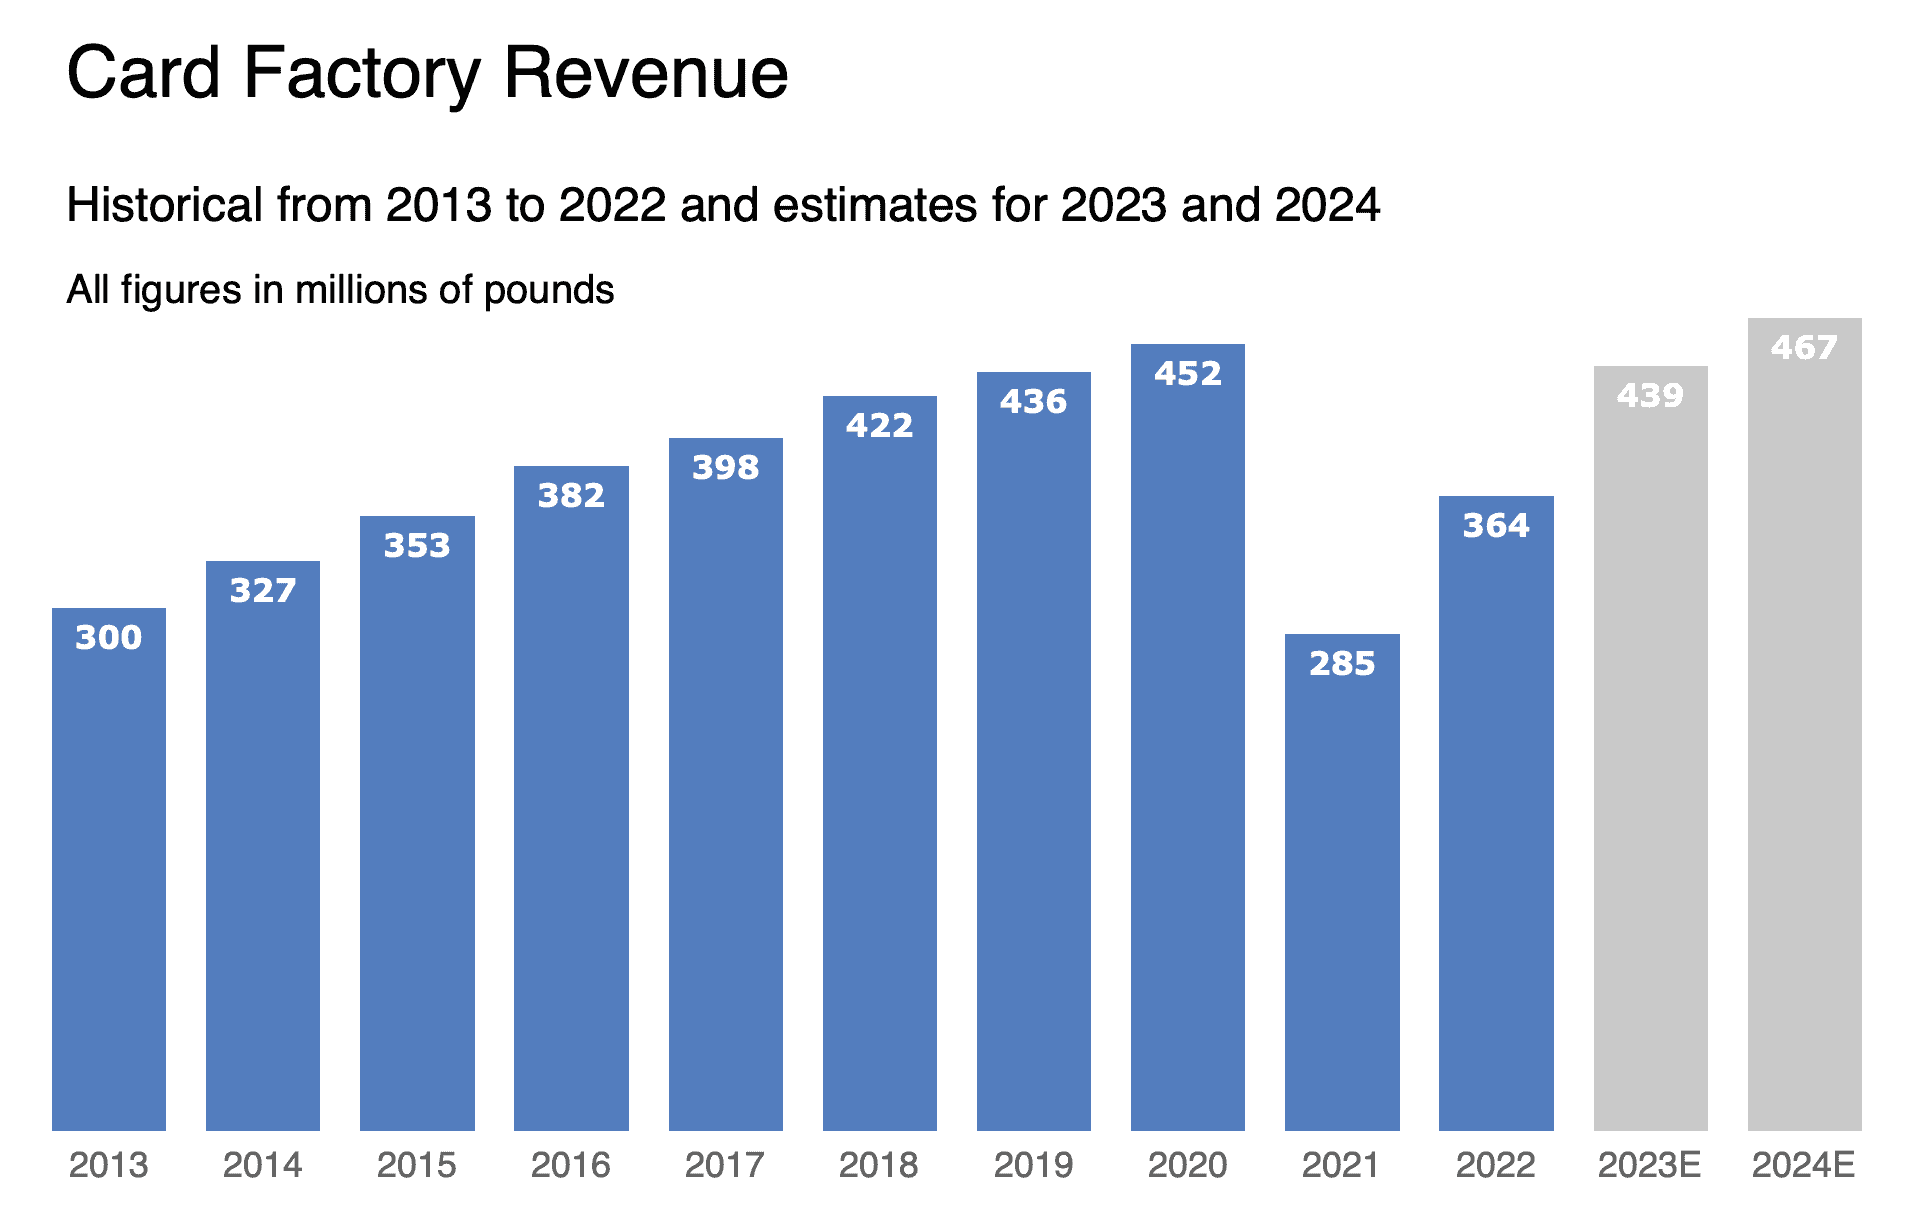 A bar chart showing Car Factory revenue growth from 2013 to 2020, then a dip during the pandemic, but a return to growth after with estimates suggesting revenue will surpass the pre pandemic peak, which if true, should be good for the card factory share price